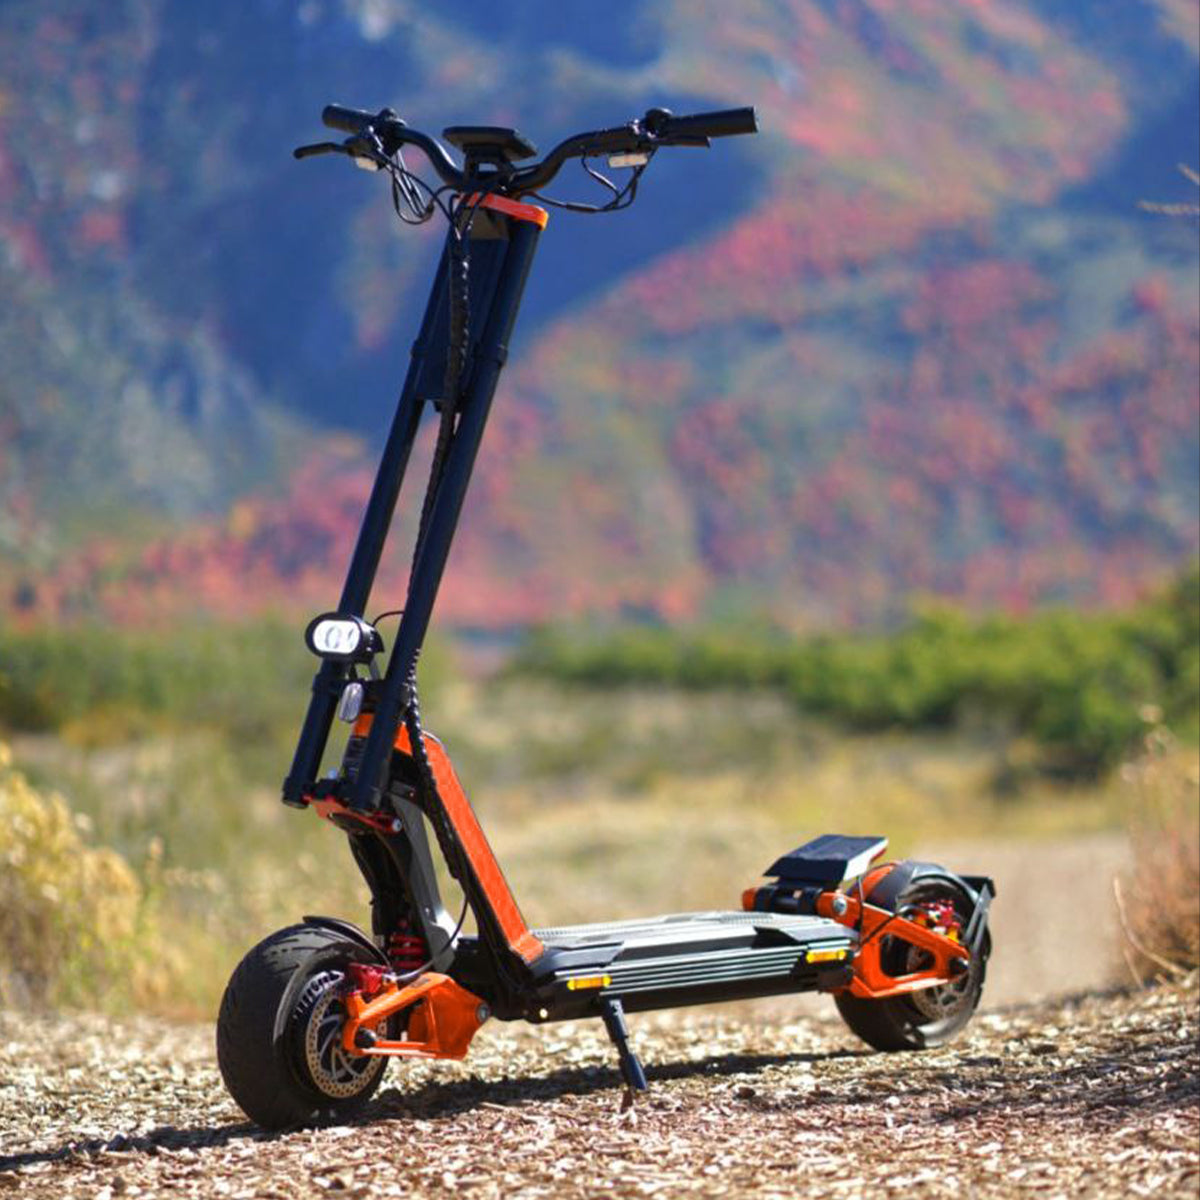 Patín Scooter Eléctrico Inmotion RS LITE